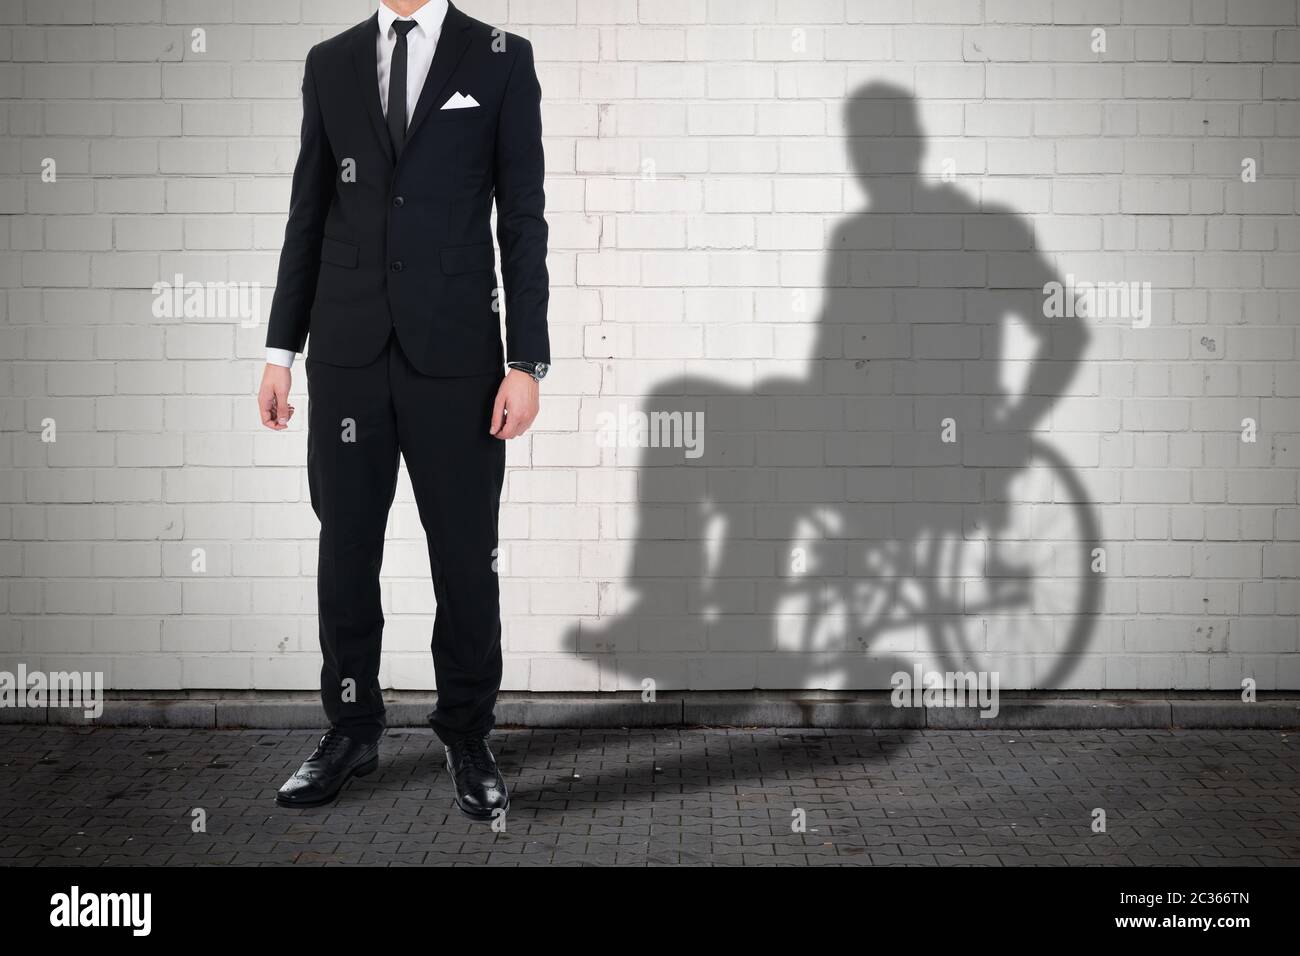 Businessman Standing Against White Brick Wall With Shadow Of A Disable Man Sitting On Wheelchair Stock Photo